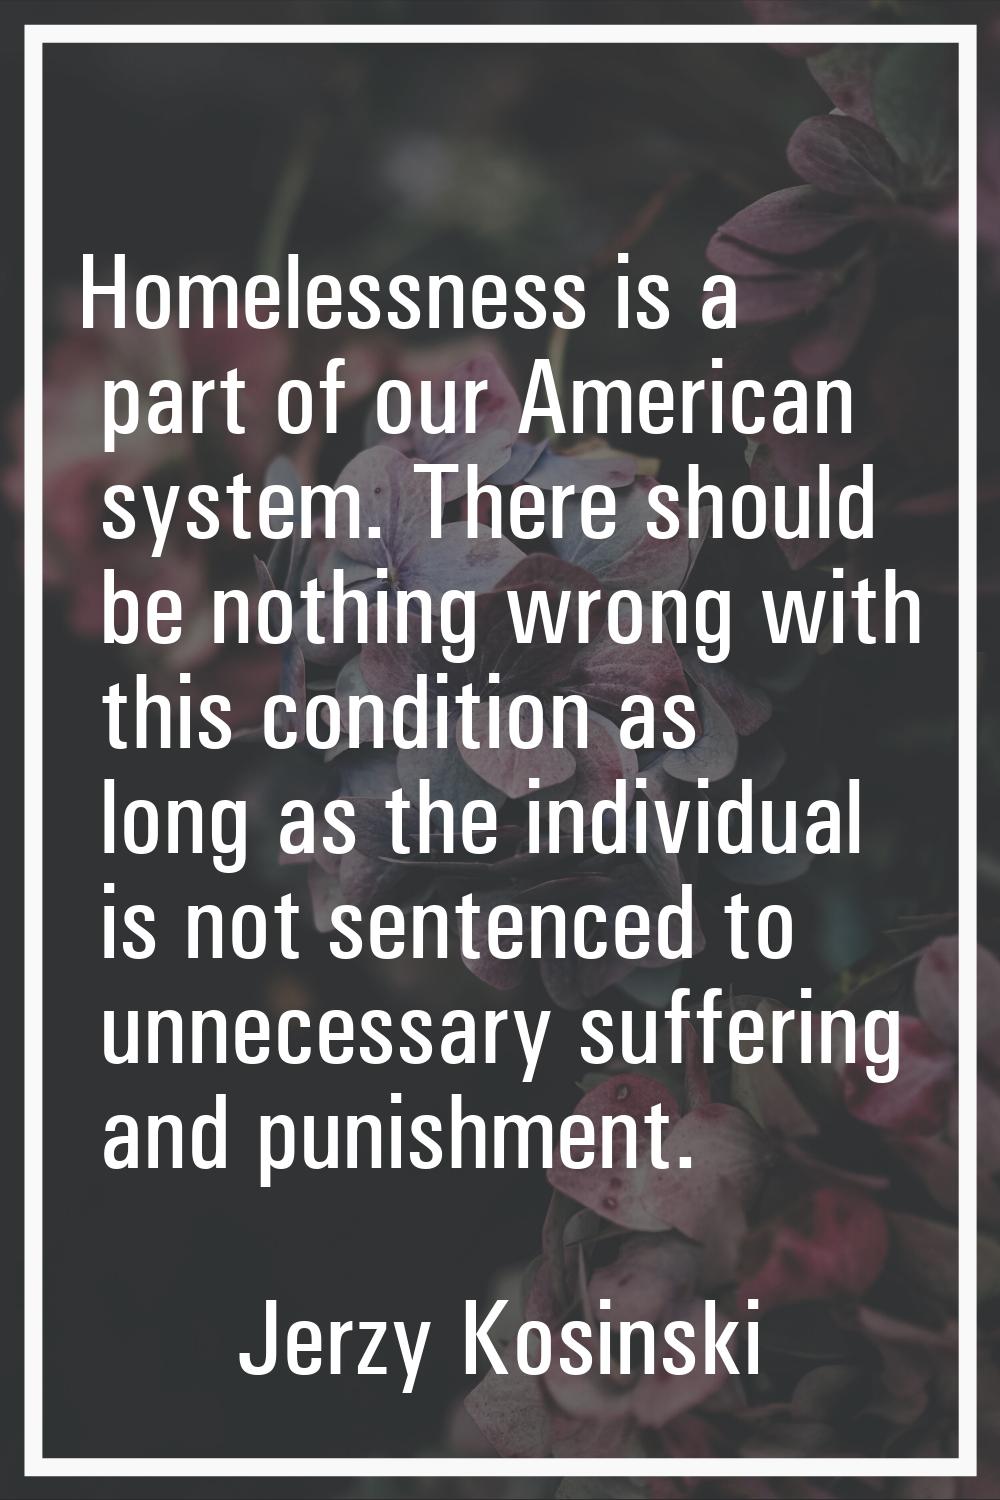 Homelessness is a part of our American system. There should be nothing wrong with this condition as